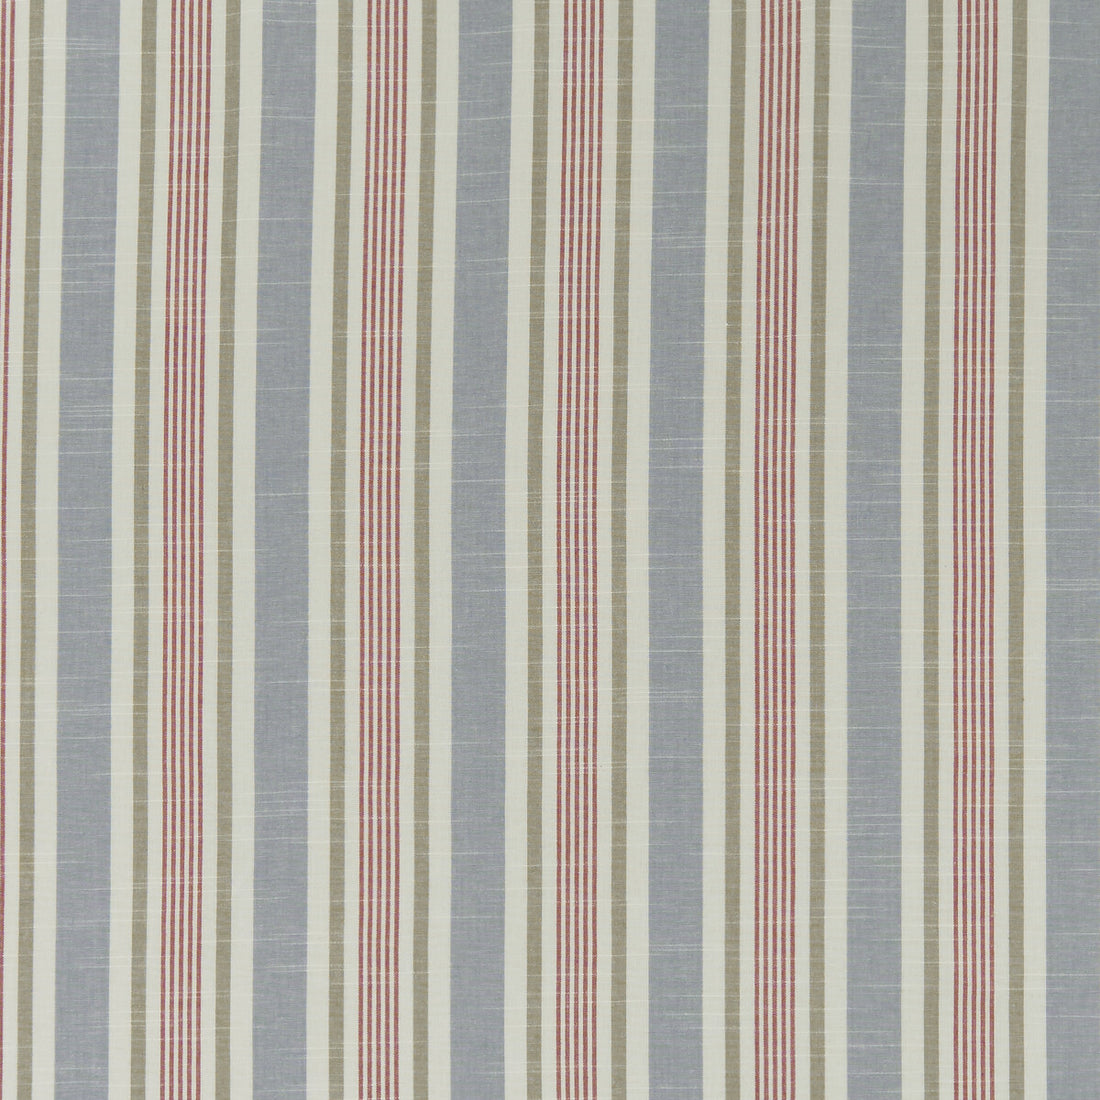 Mappleton fabric in denim/red color - pattern F1310/04.CAC.0 - by Clarke And Clarke in the Bempton By Studio G For C&amp;C collection